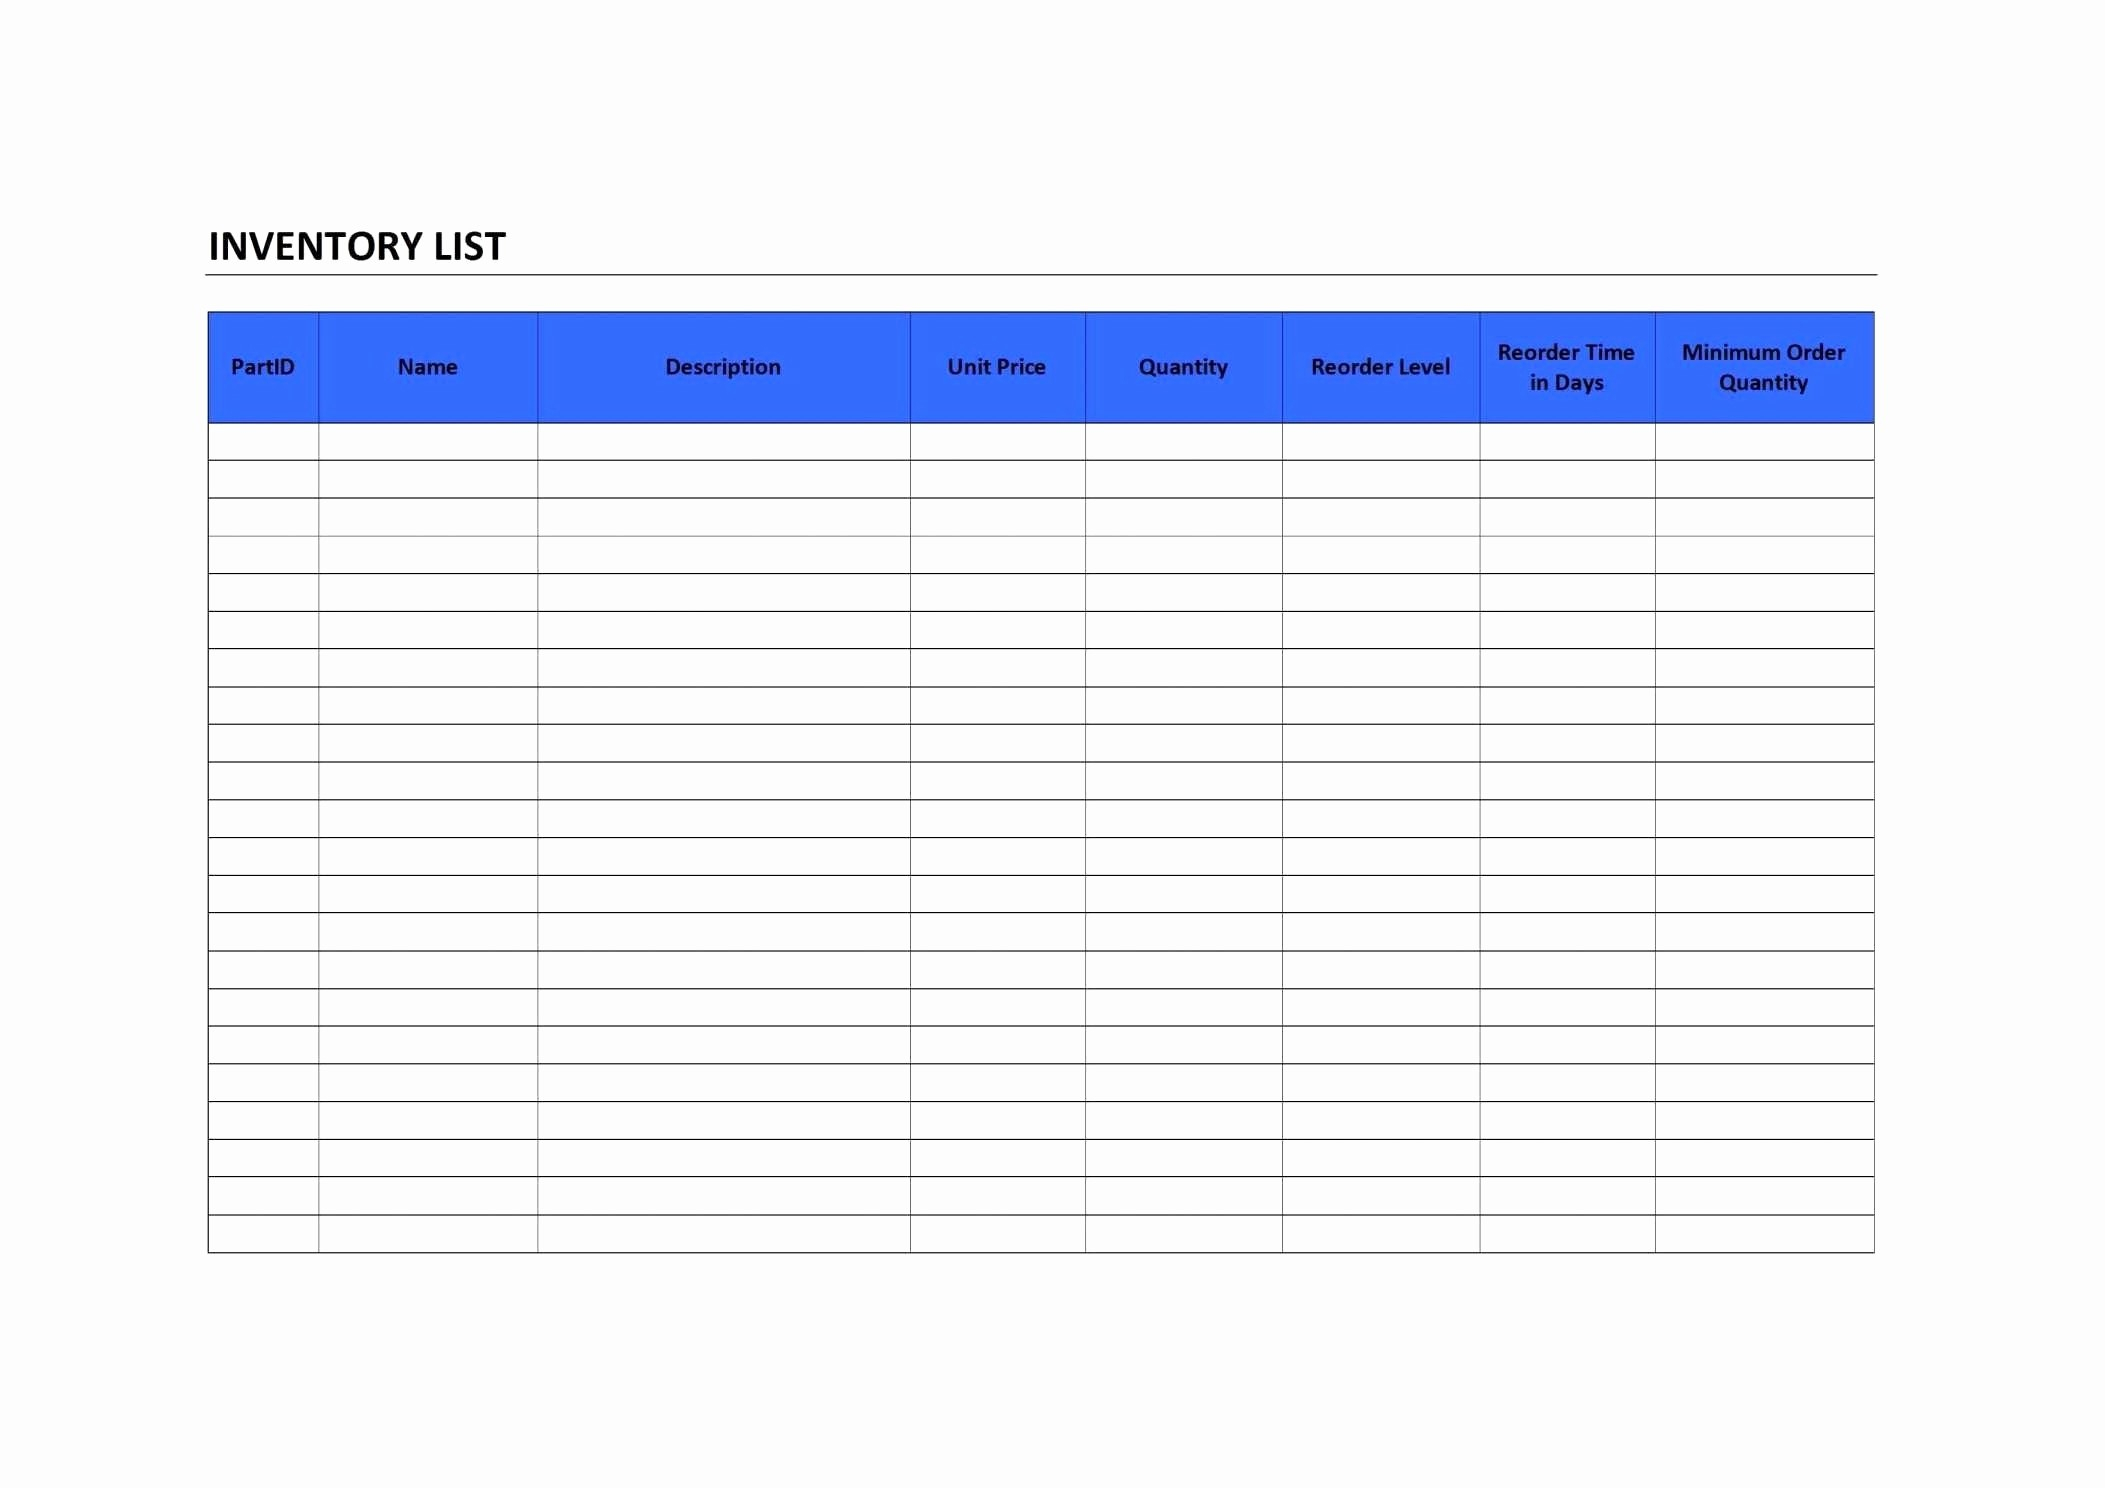 Personal Property Inventory List Template Excel Stock Control inside Inventory Management Template Free